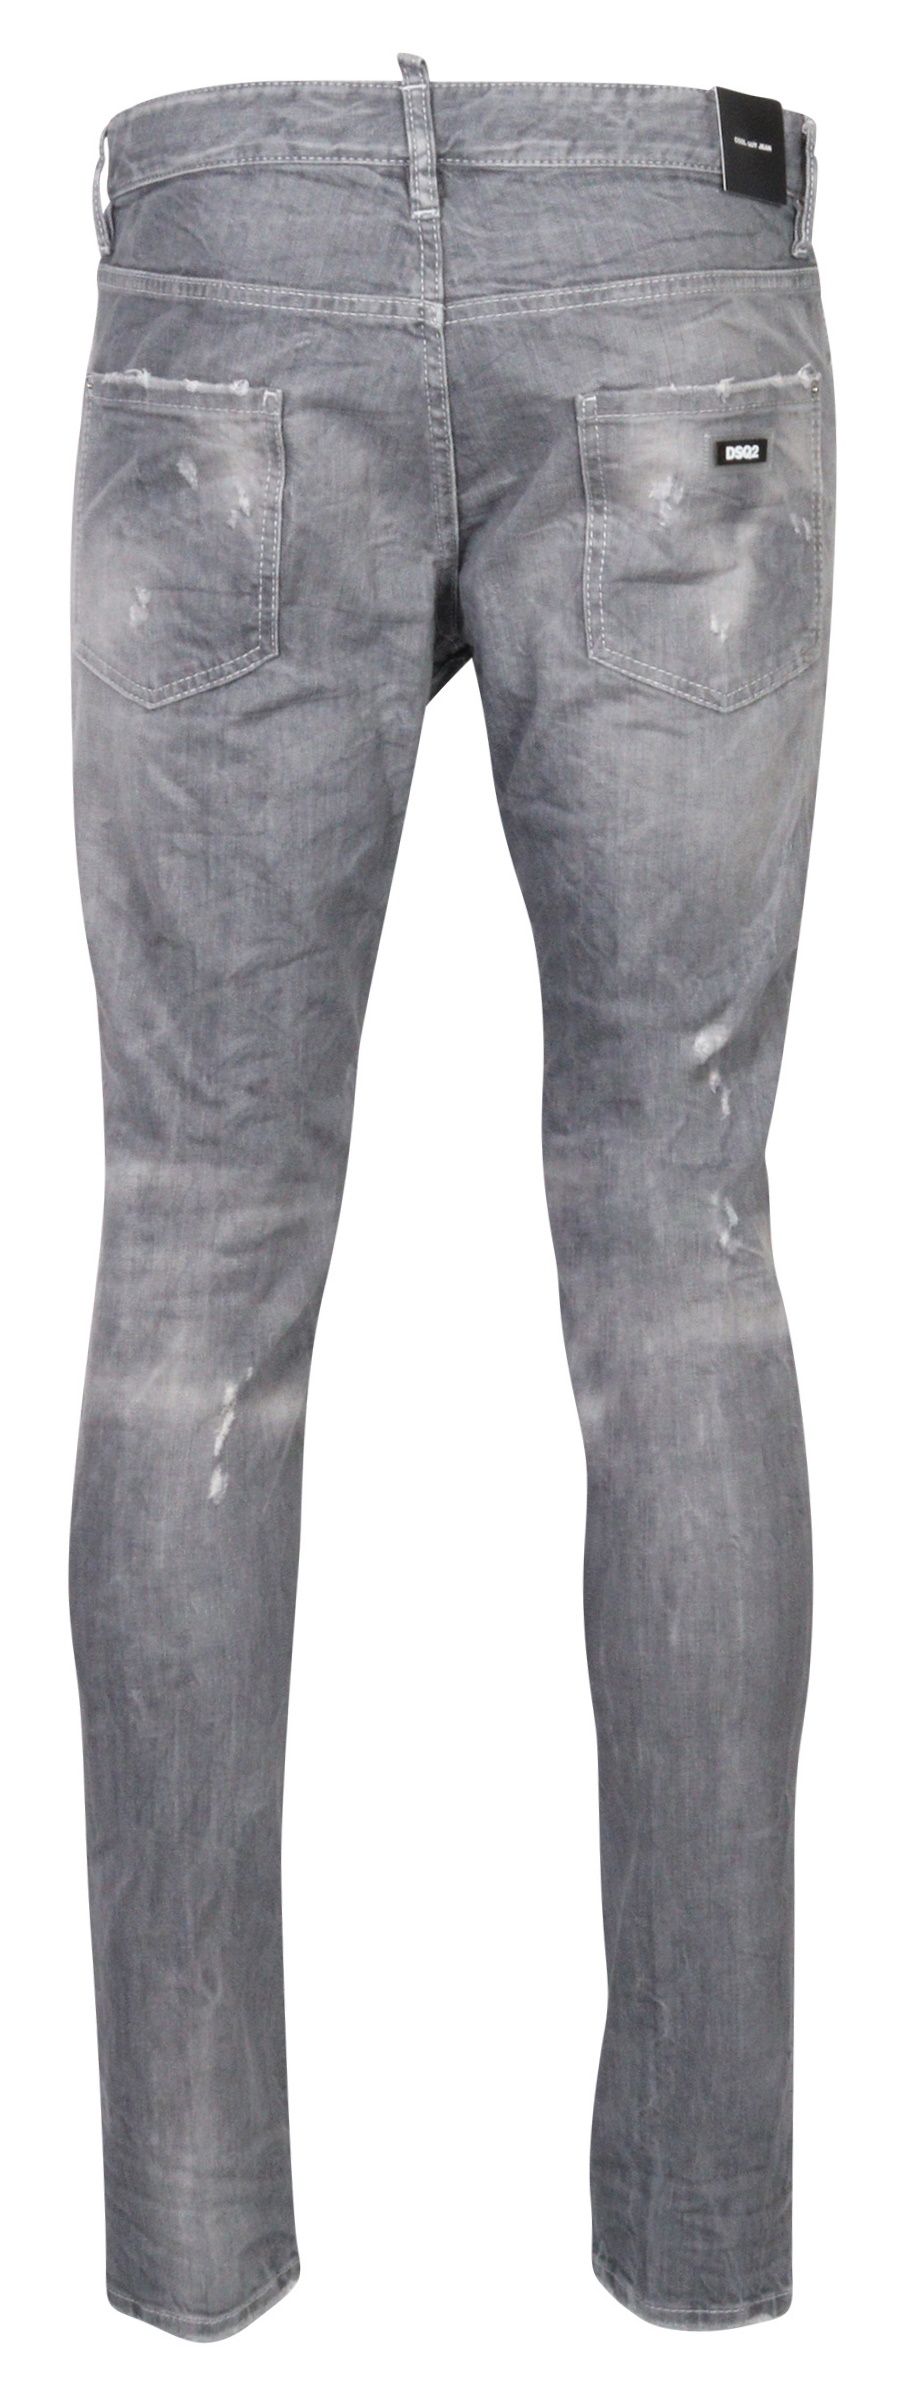 Dsquared Cool Guy Jeans Light Grey Washed